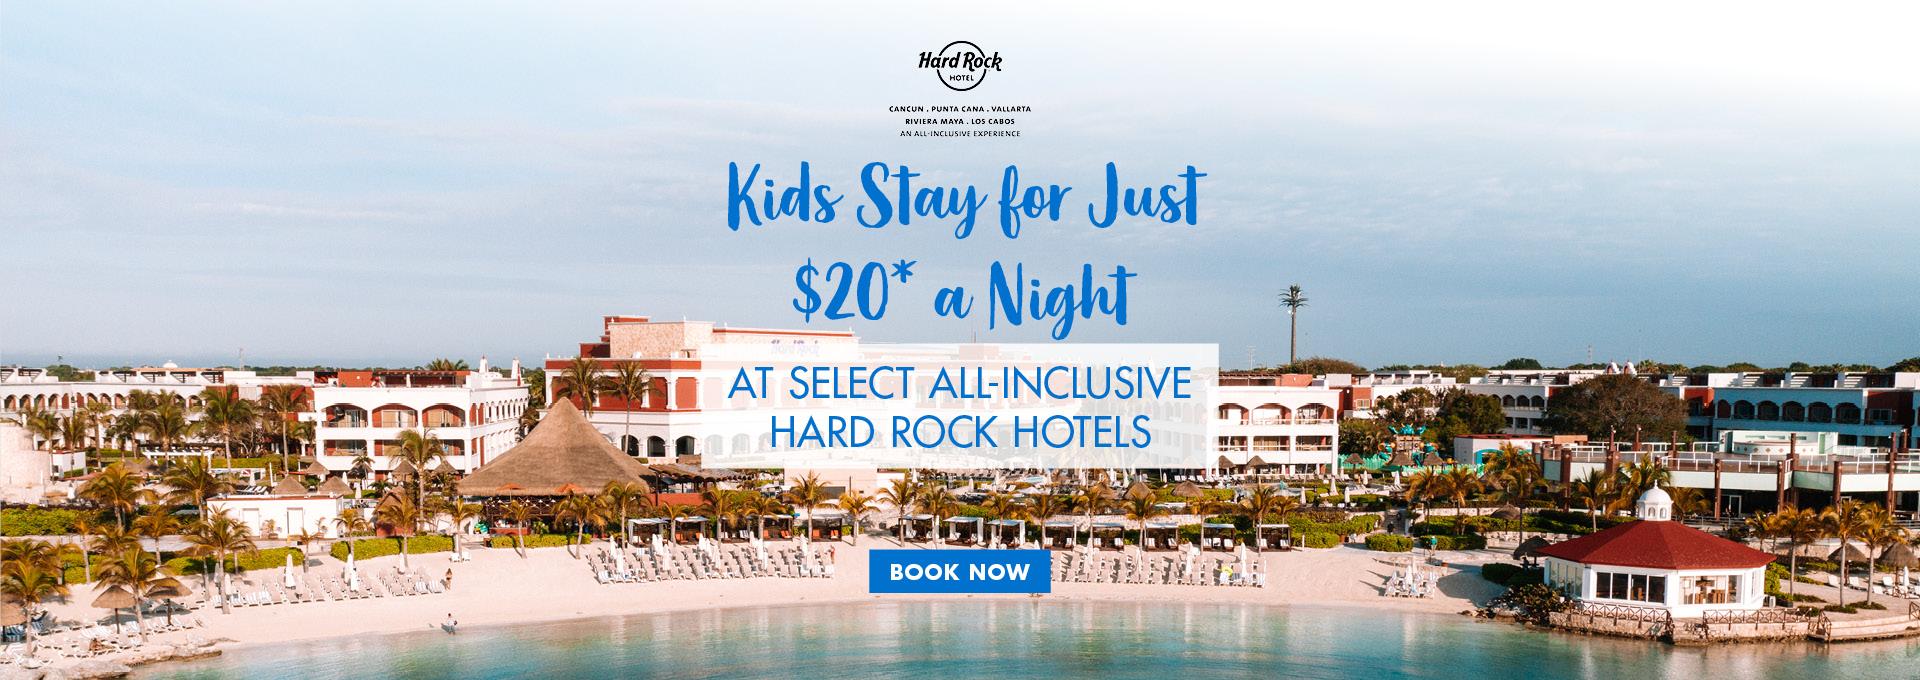 Kids Stay for Just $20 a Night at Hard Rock Hotels & Resorts